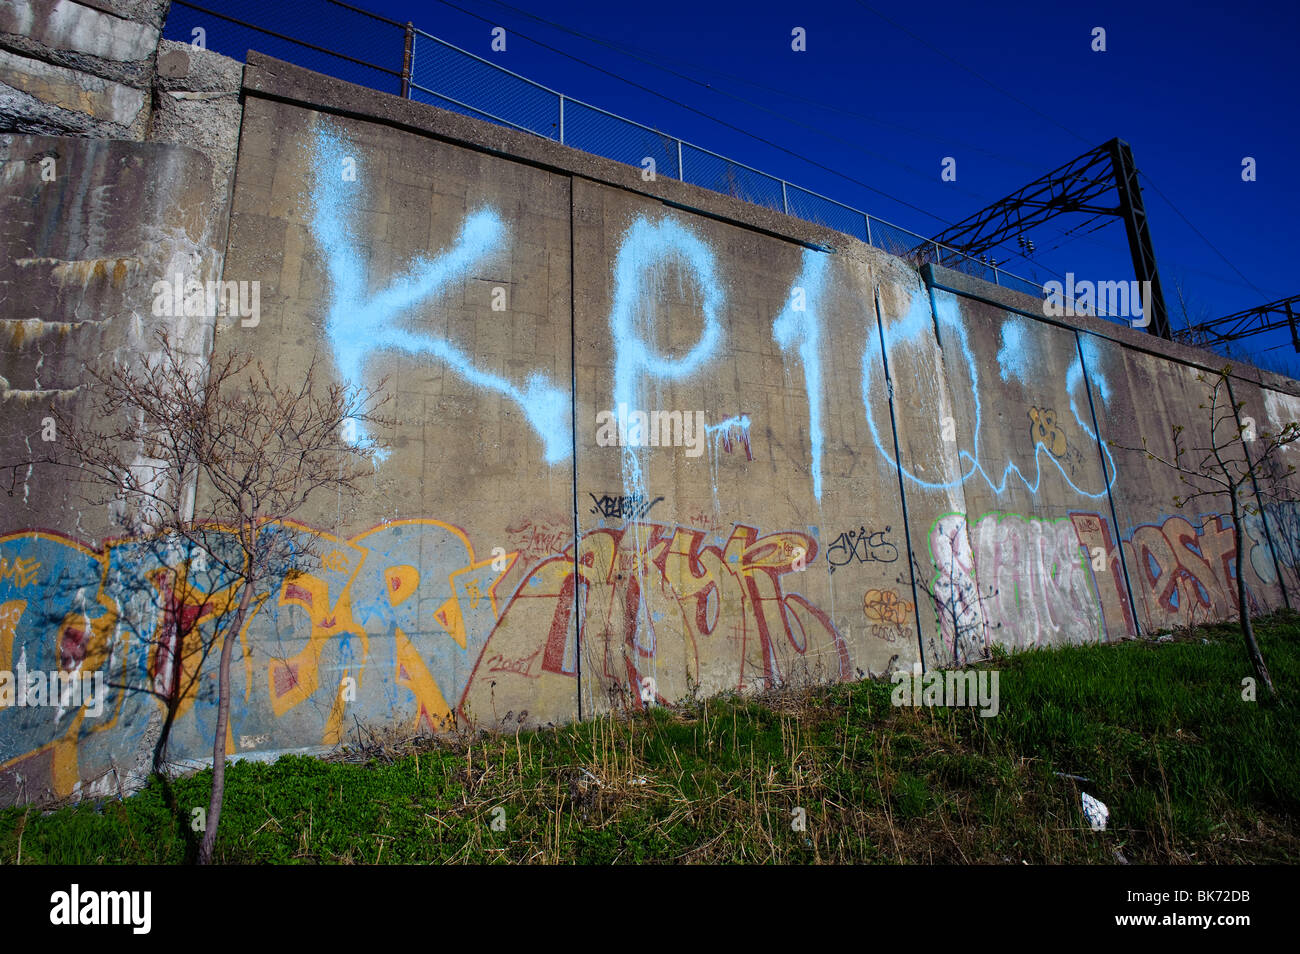 Concrete wall adorned with graffitis, near Lachine Canal, Montreal, Quebec, Canada. Stock Photo